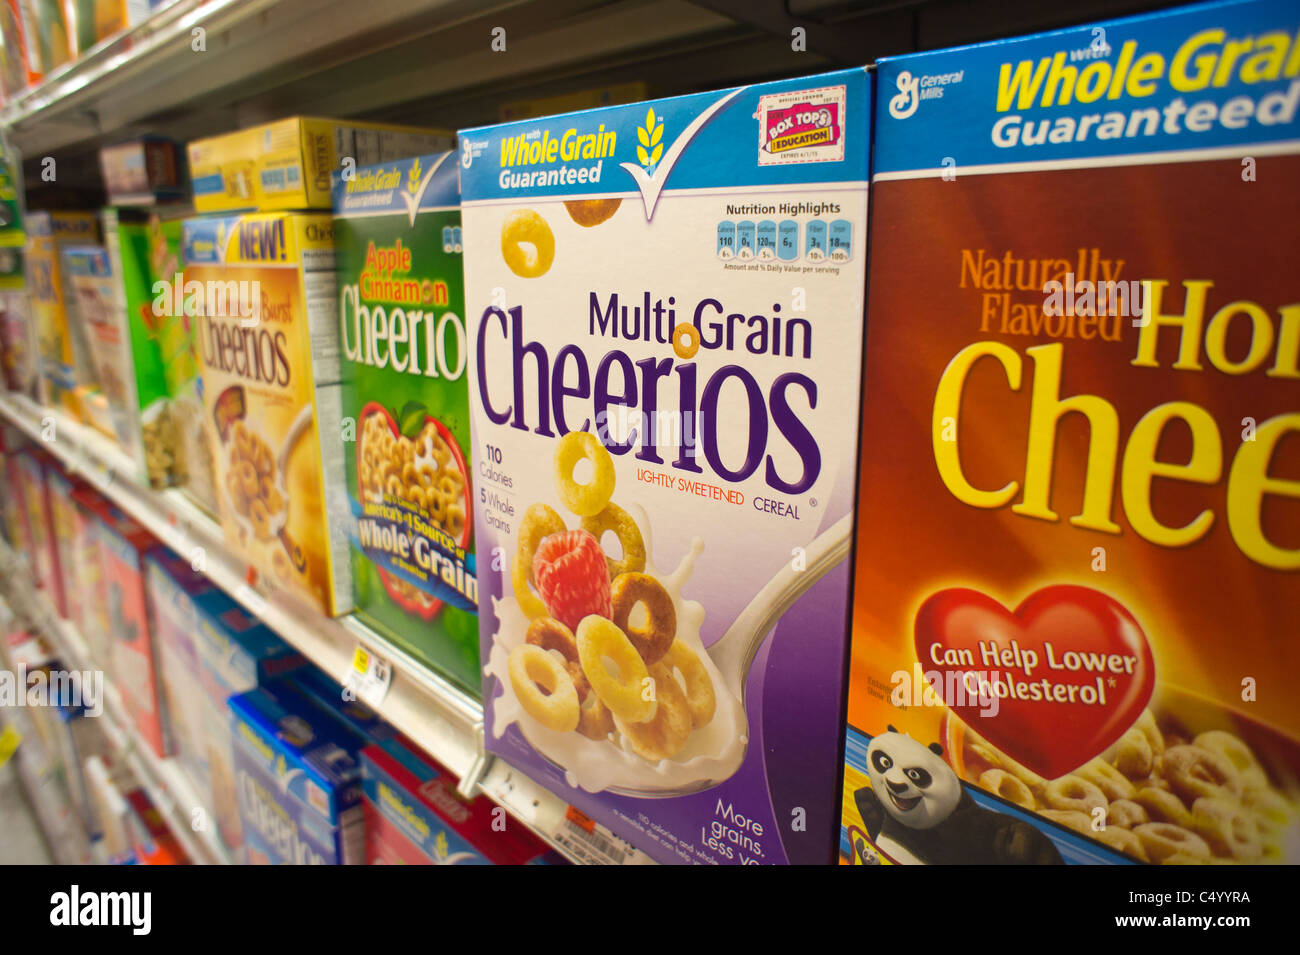 Boxes of General Mills Cheerios breakfast cereals in the grocery department of a store in New York Stock Photo